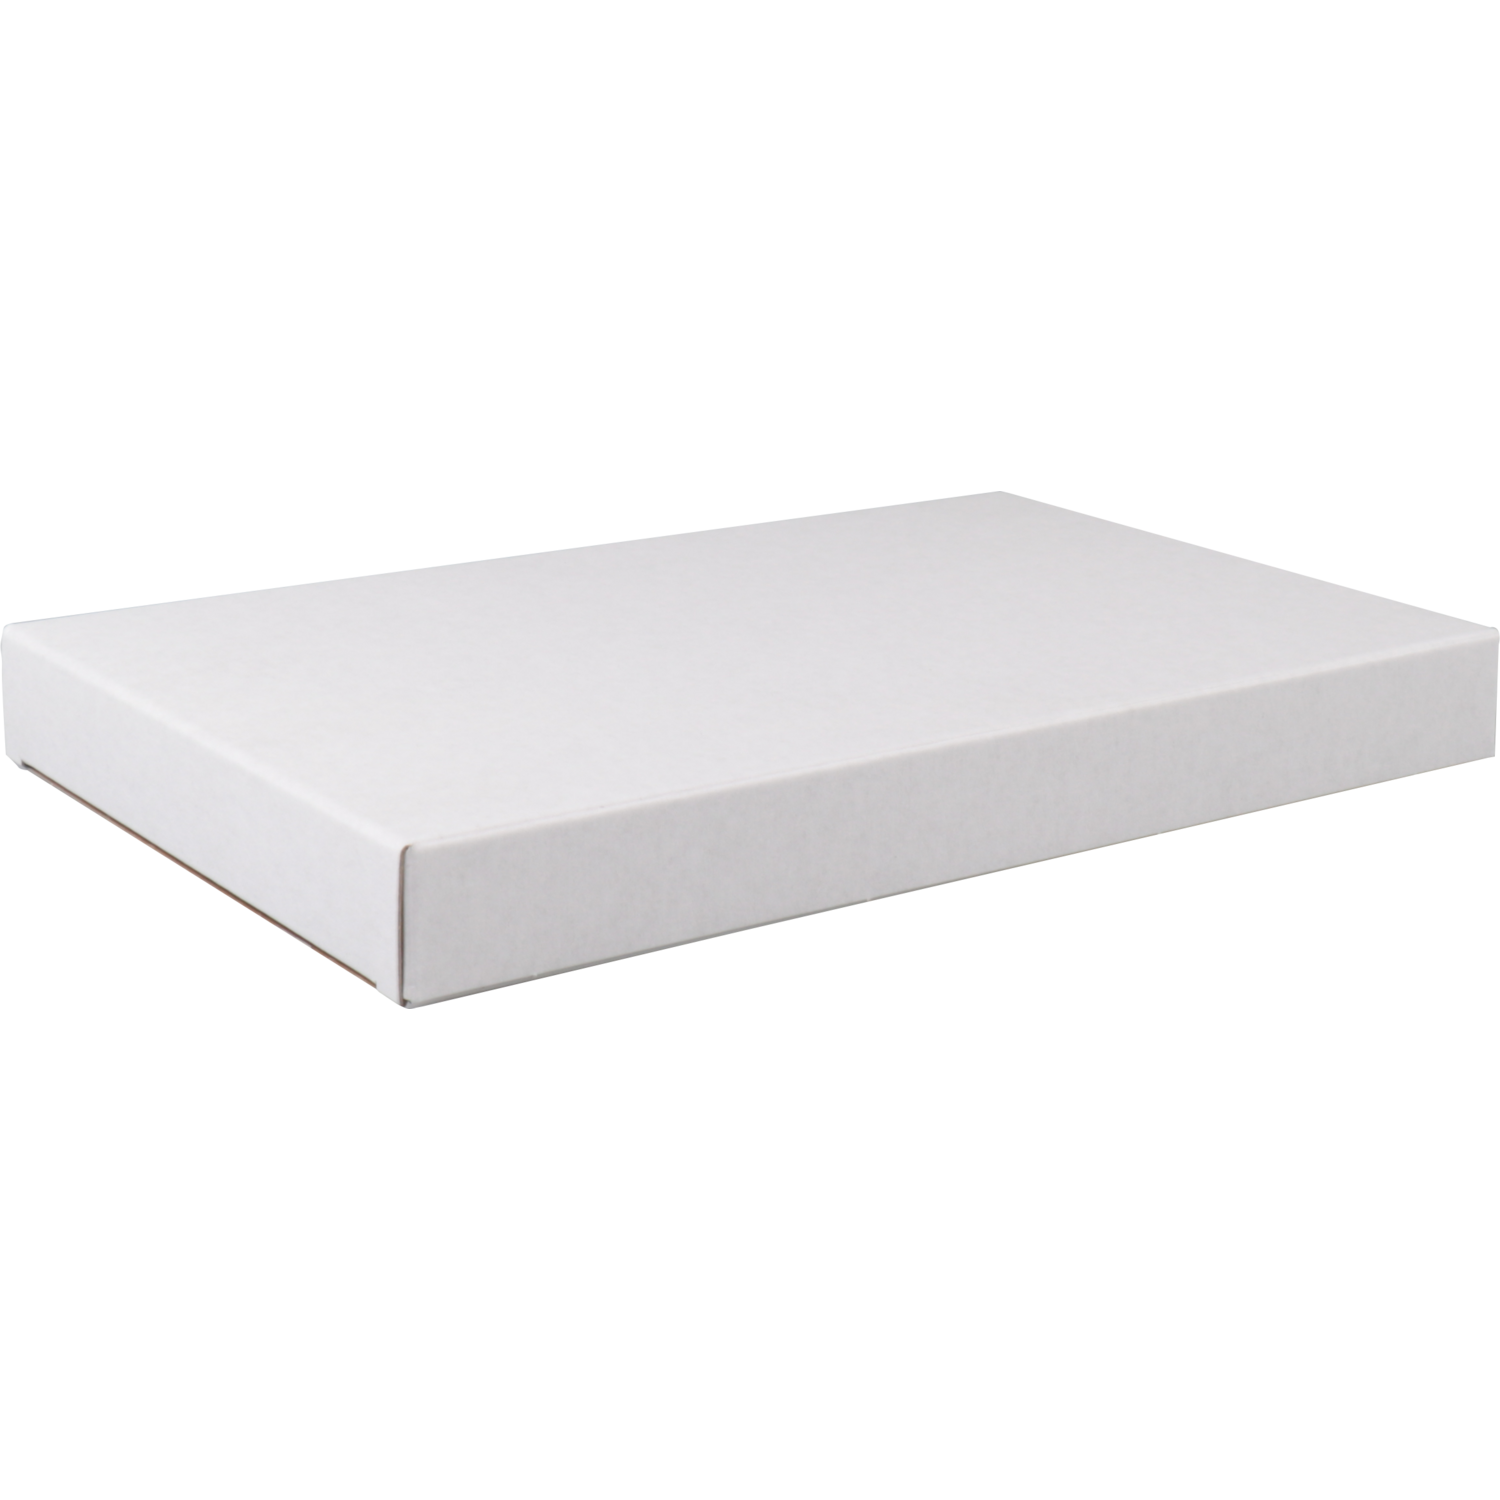 SendProof® Fits through letterbox - box, A5, cardboard, 160x255x28mm, white 1